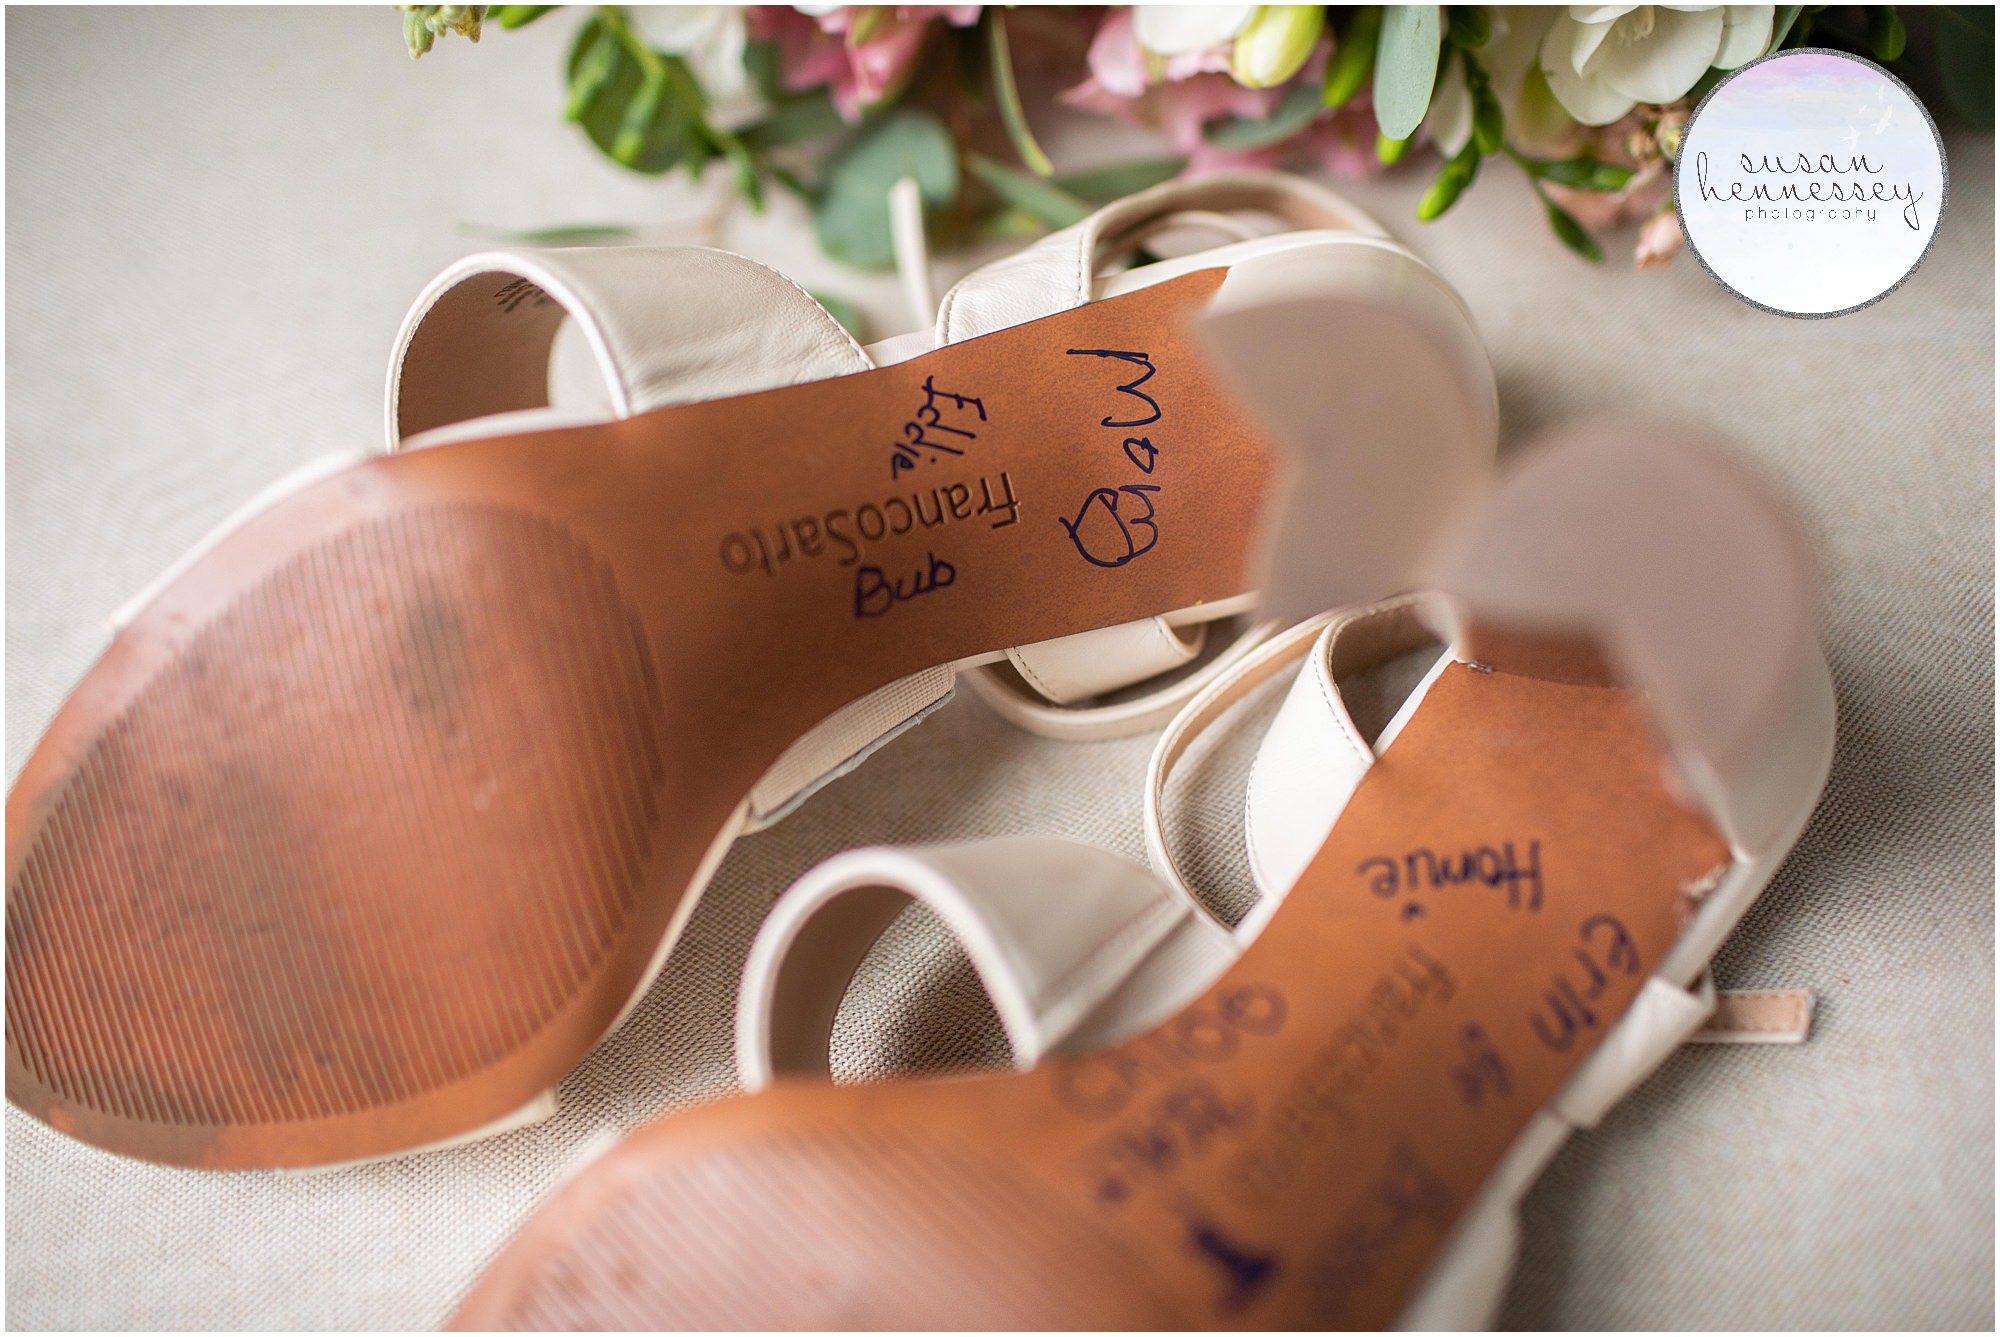 The bride's family and bridesmaids sign bottom of shoe as her "something blue".